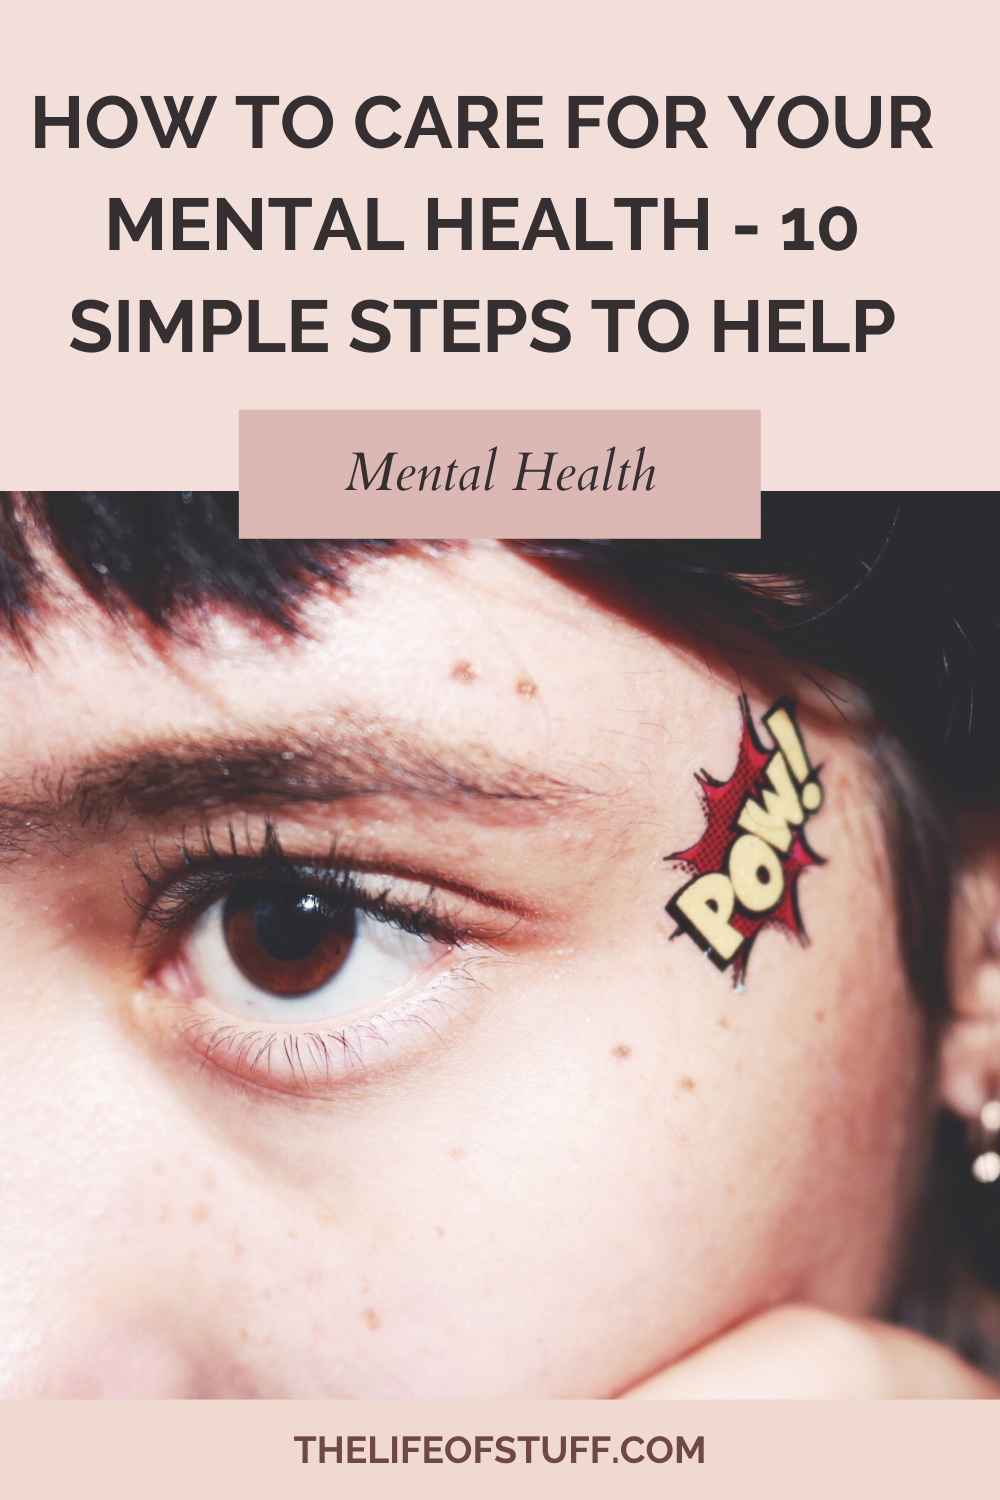 10 Simple Steps To Help You Care For Your Mental Health - The Life of Stuff